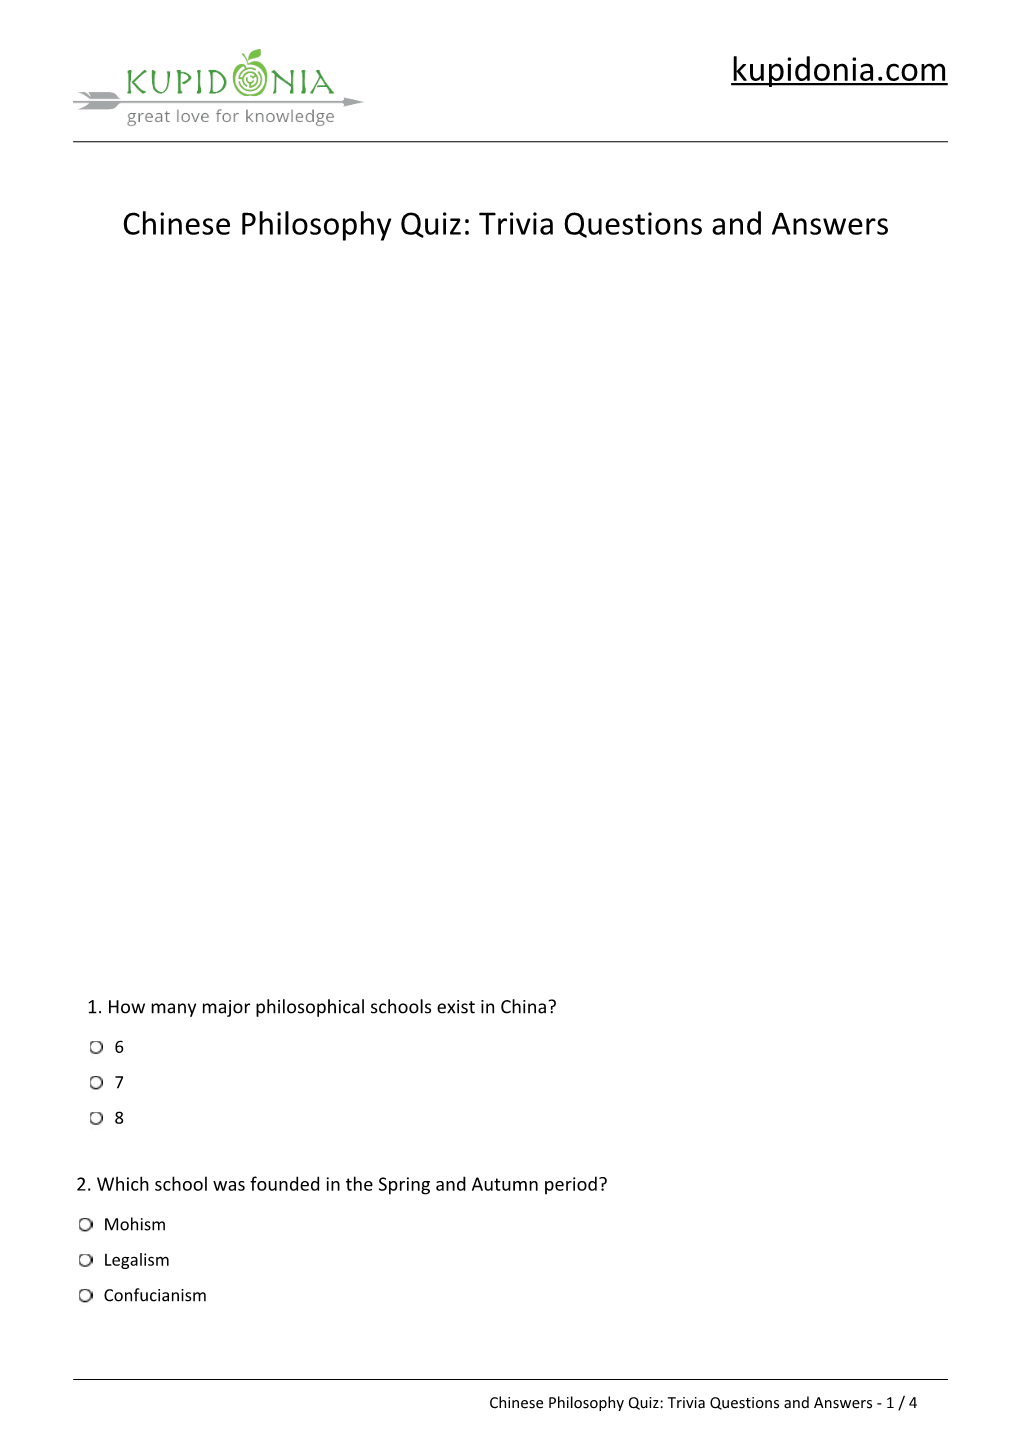 Chinese Philosophy Quiz: Trivia Questions and Answers